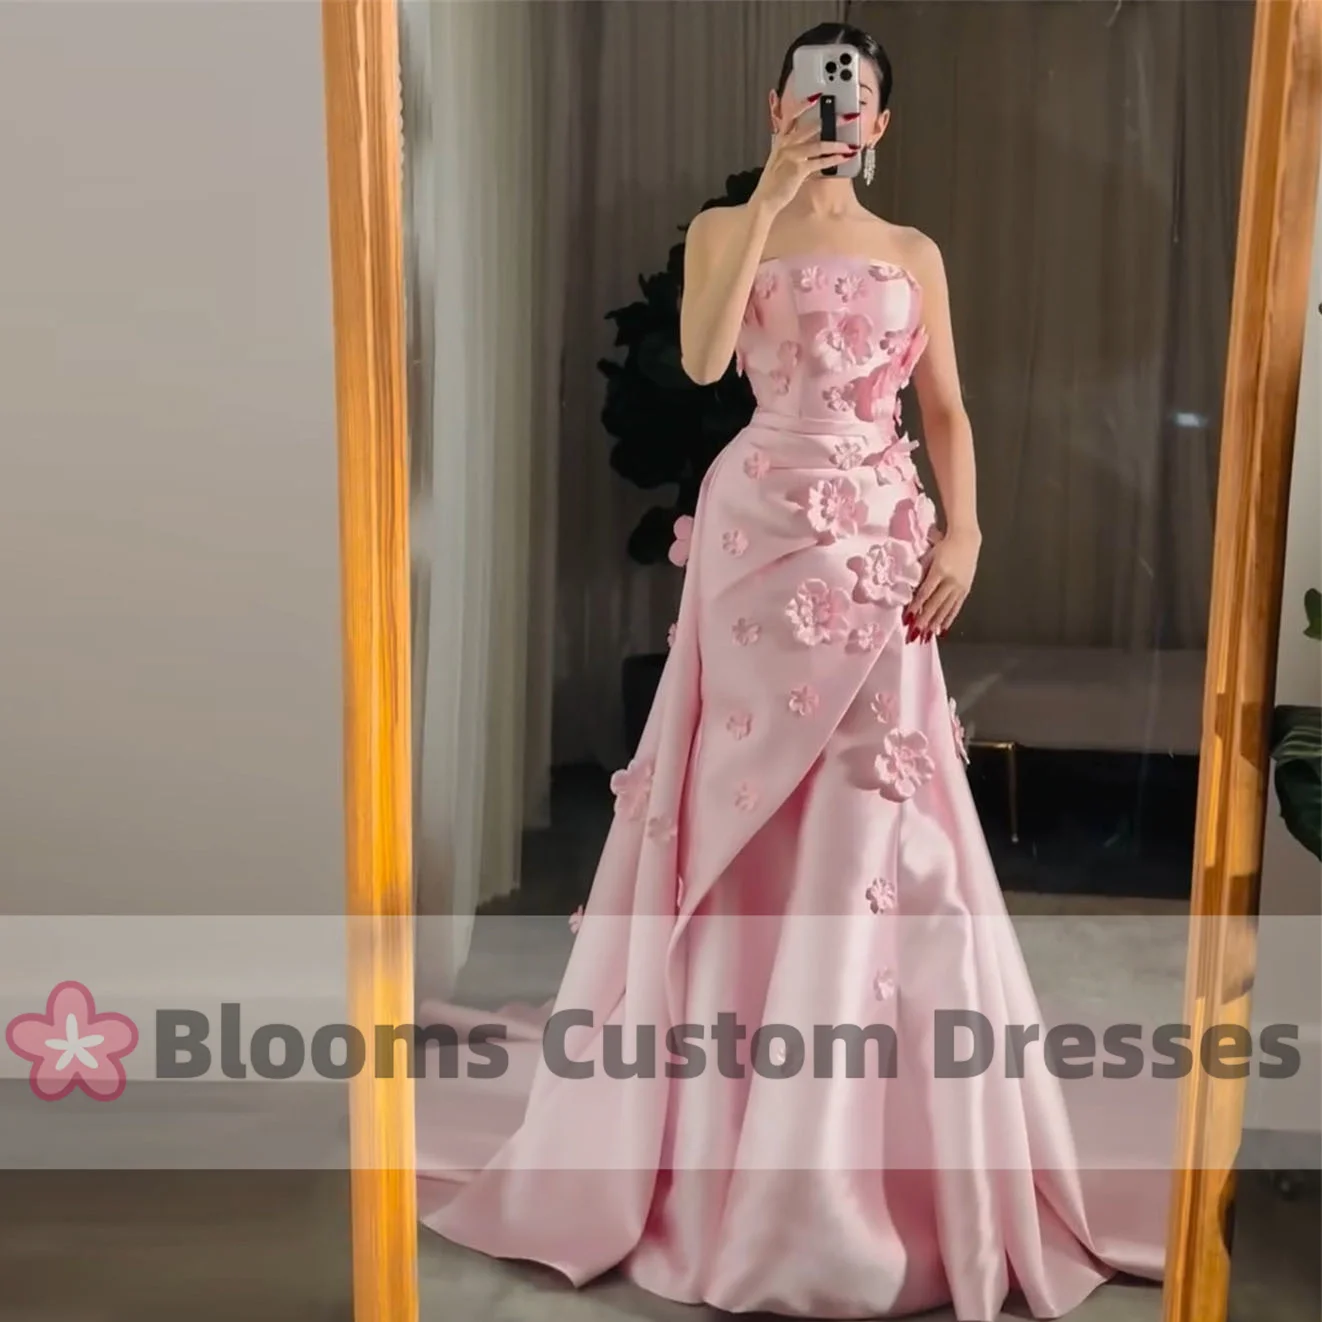 

Blooms Gorgeous Satin 3D Flowers Pink Evening Dresses Mermaid Lace-up Custom Prom Dress Removable Tail Formal Occasion Gown